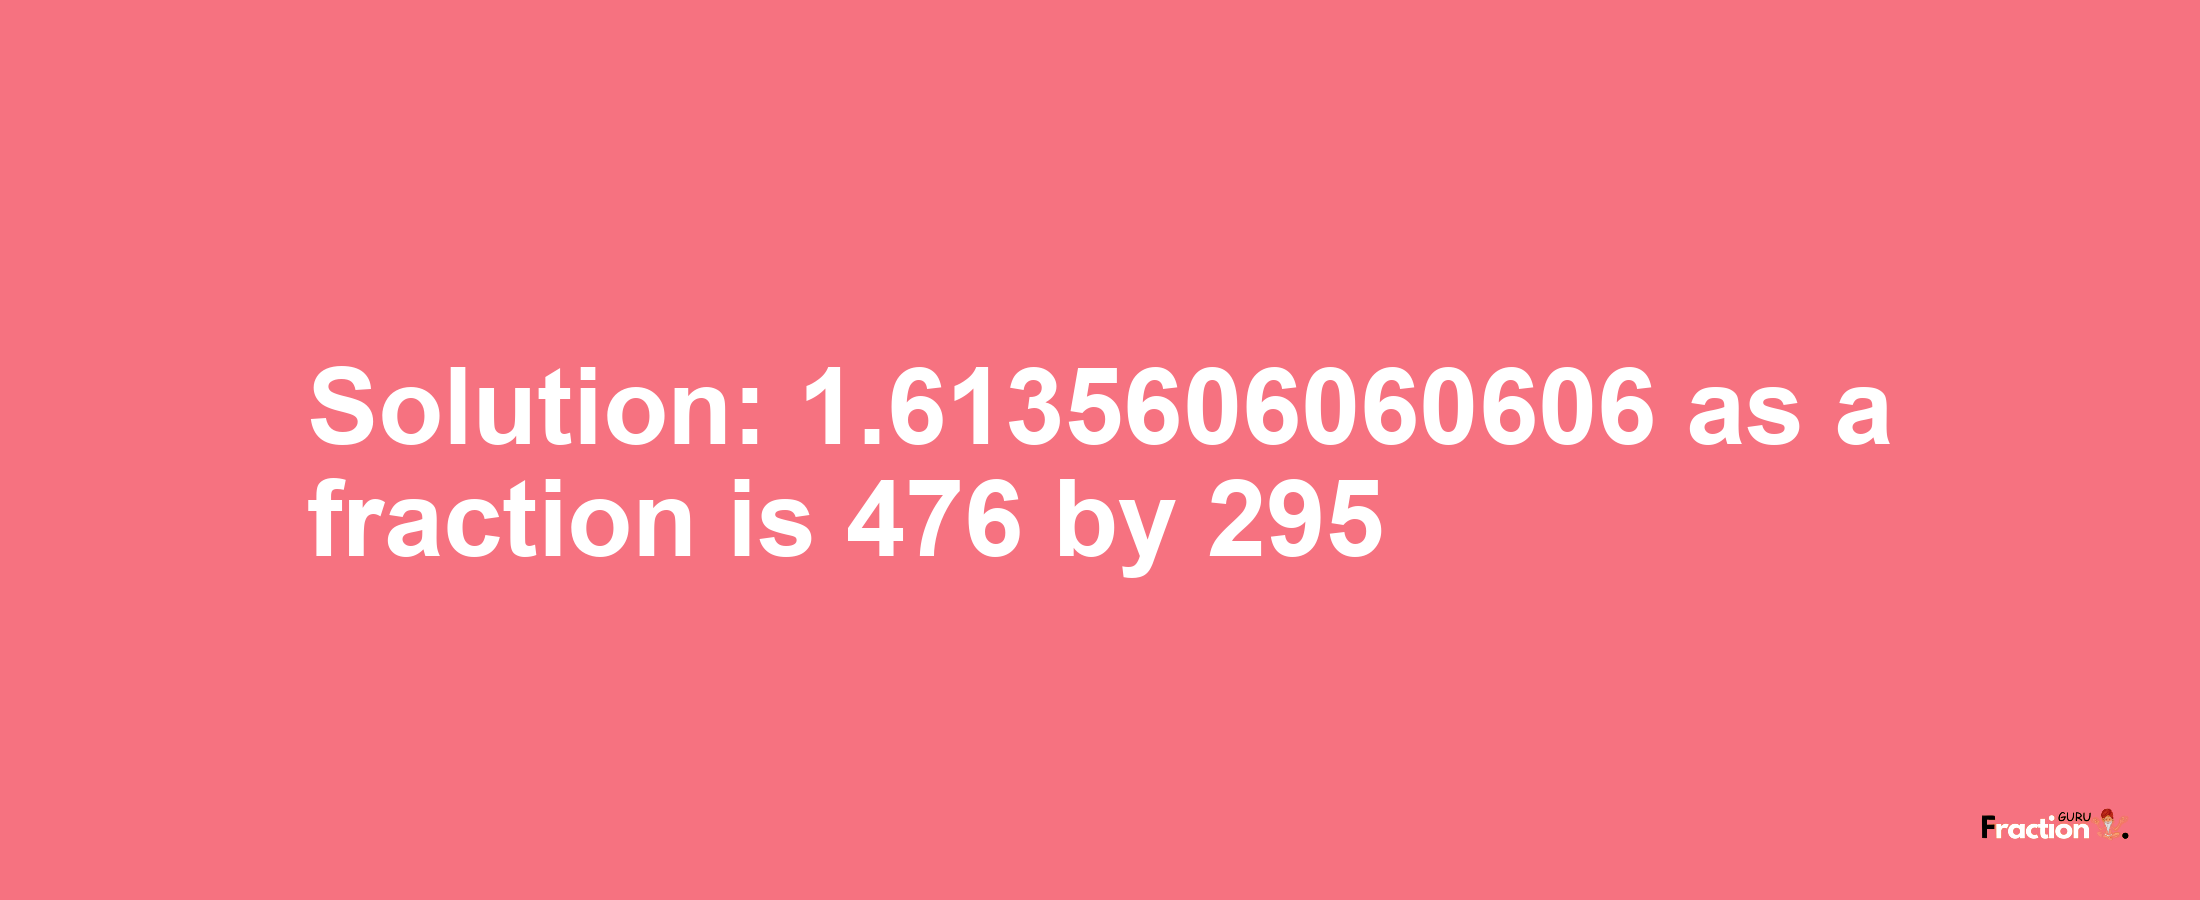 Solution:1.6135606060606 as a fraction is 476/295